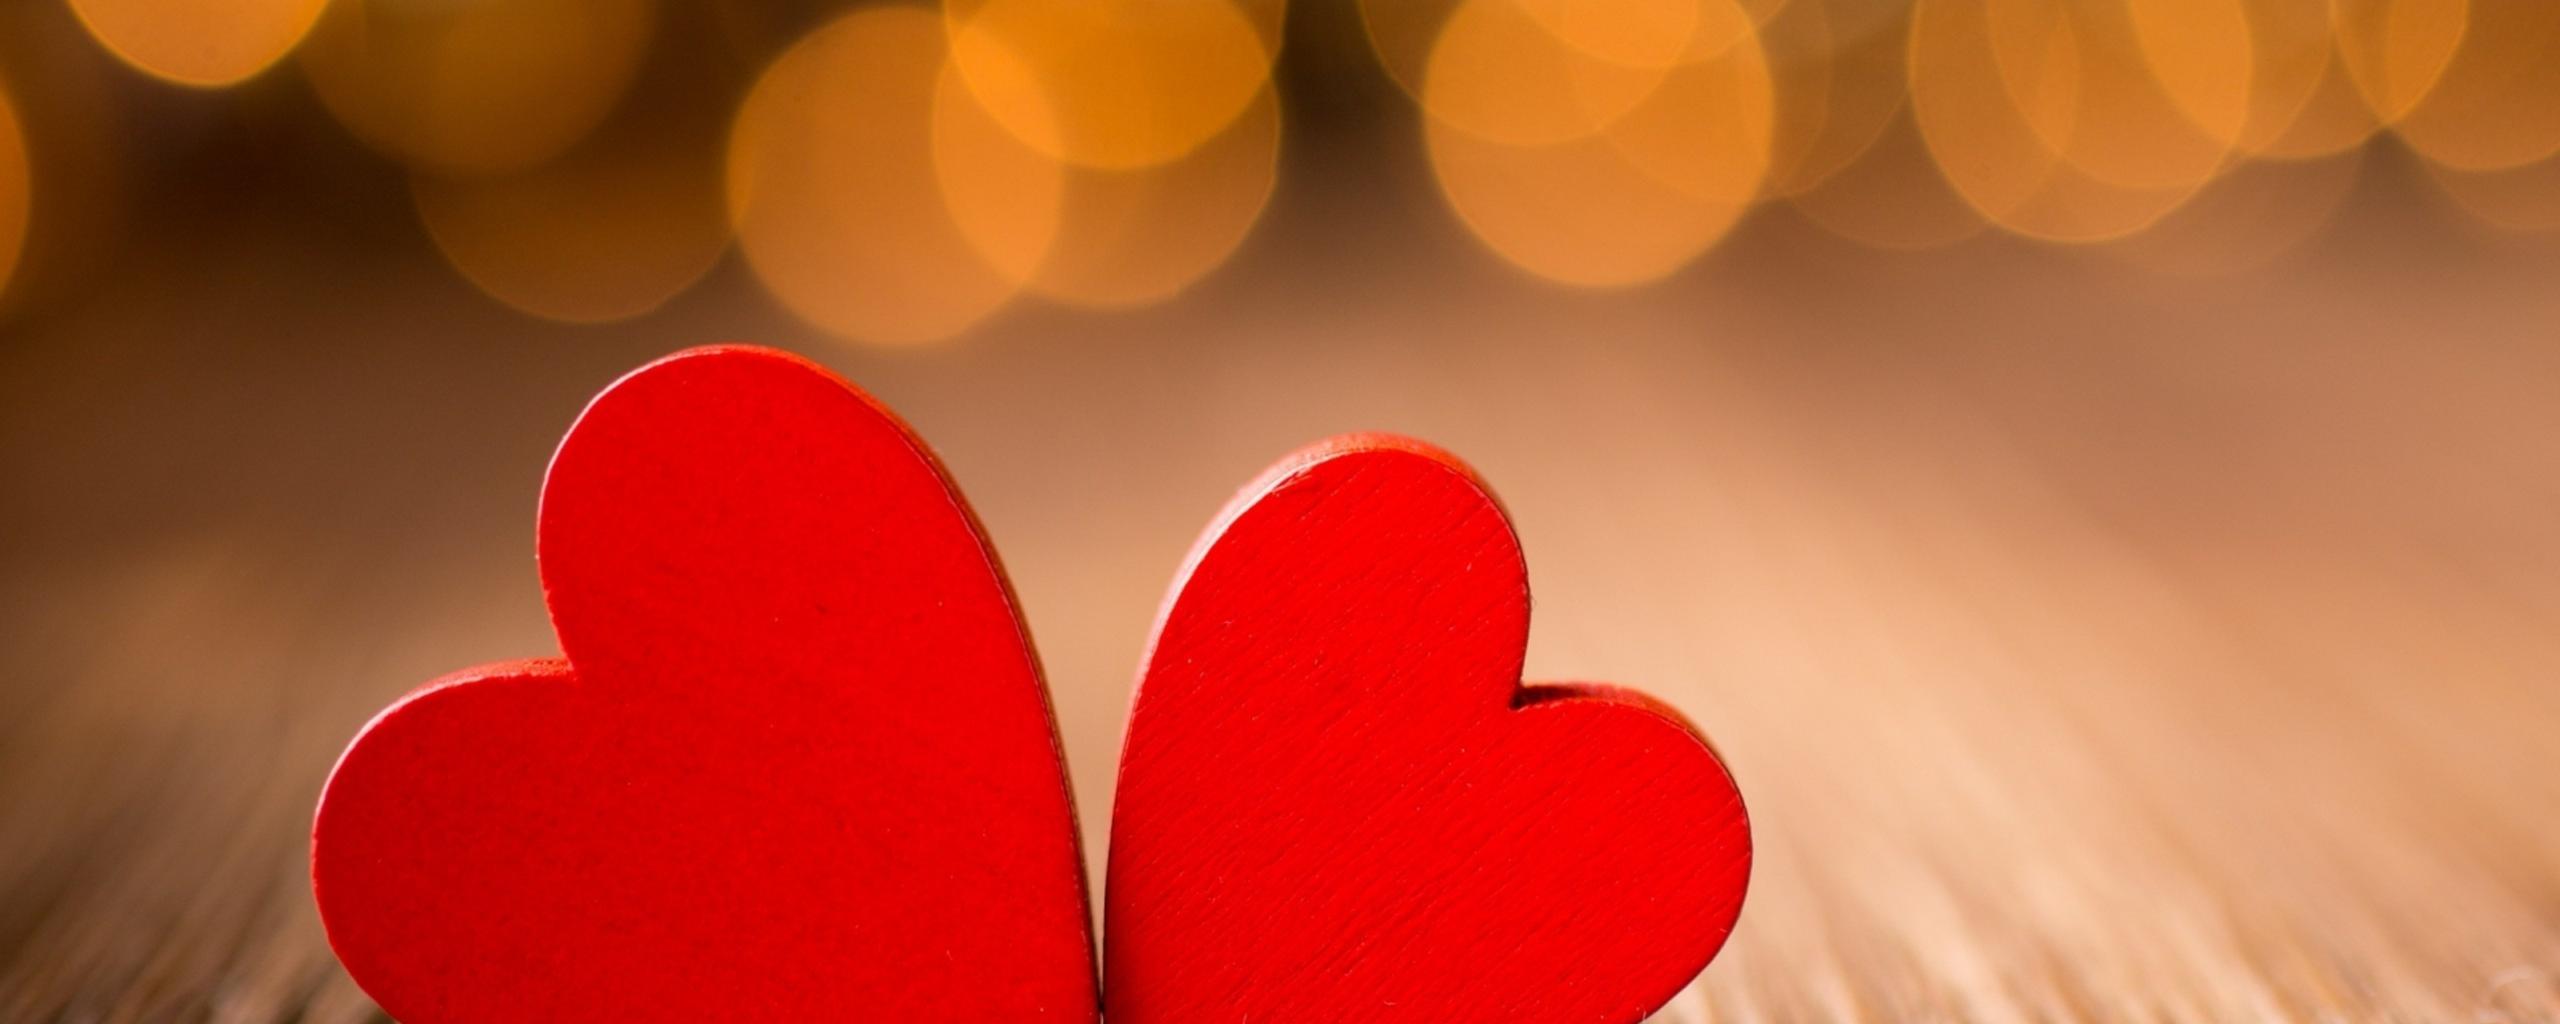 Two red little hearts - Love wallpaper